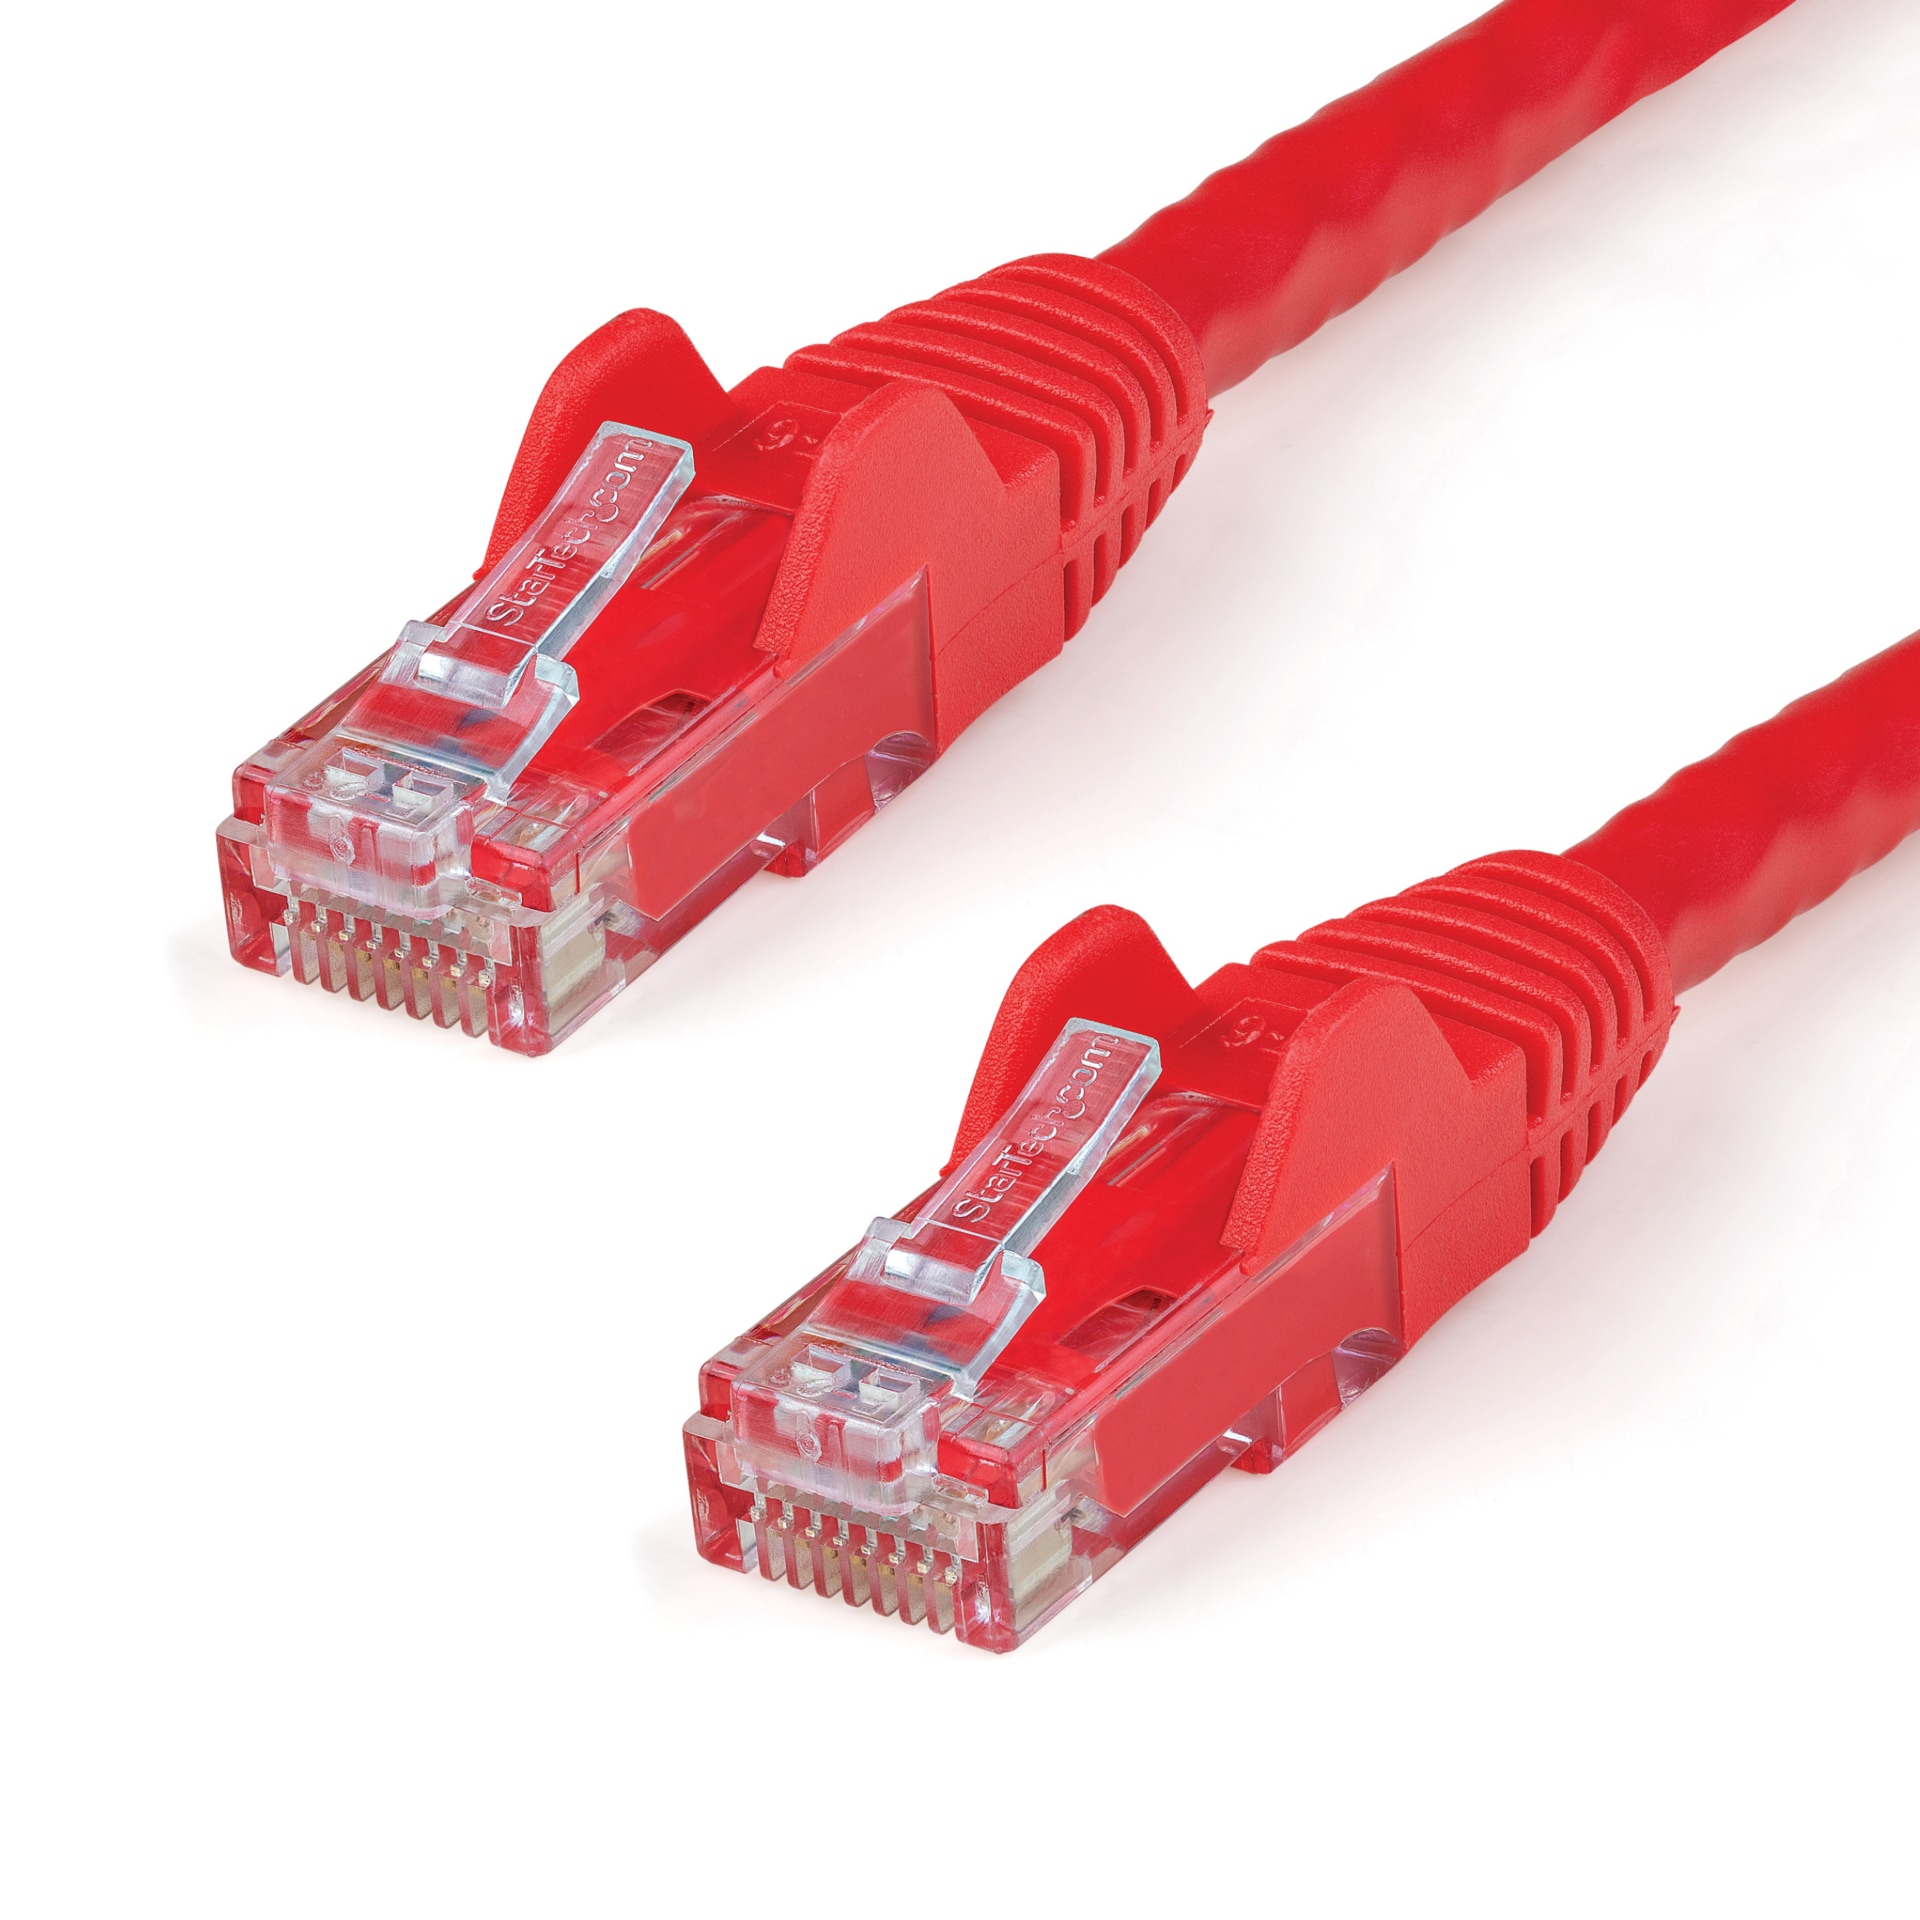 StarTech.com CAT6 Ethernet Cable 50' Red 650MHz CAT 6 Snagless Patch Cord